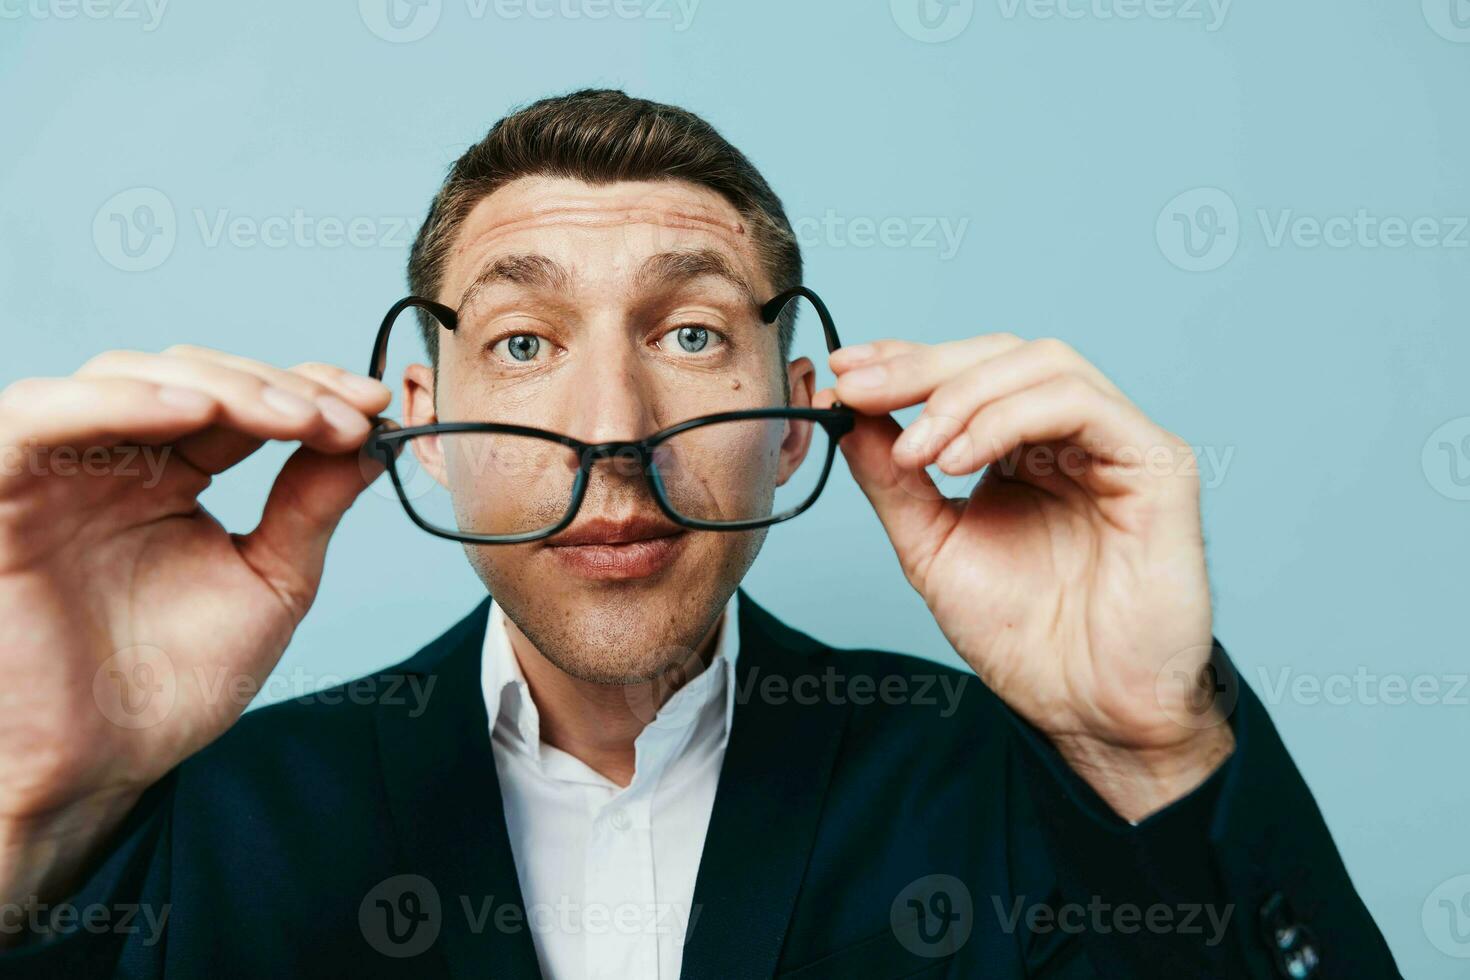 Stylish serious looking glasses positive expression men funny handsome party crazy human gesture photo